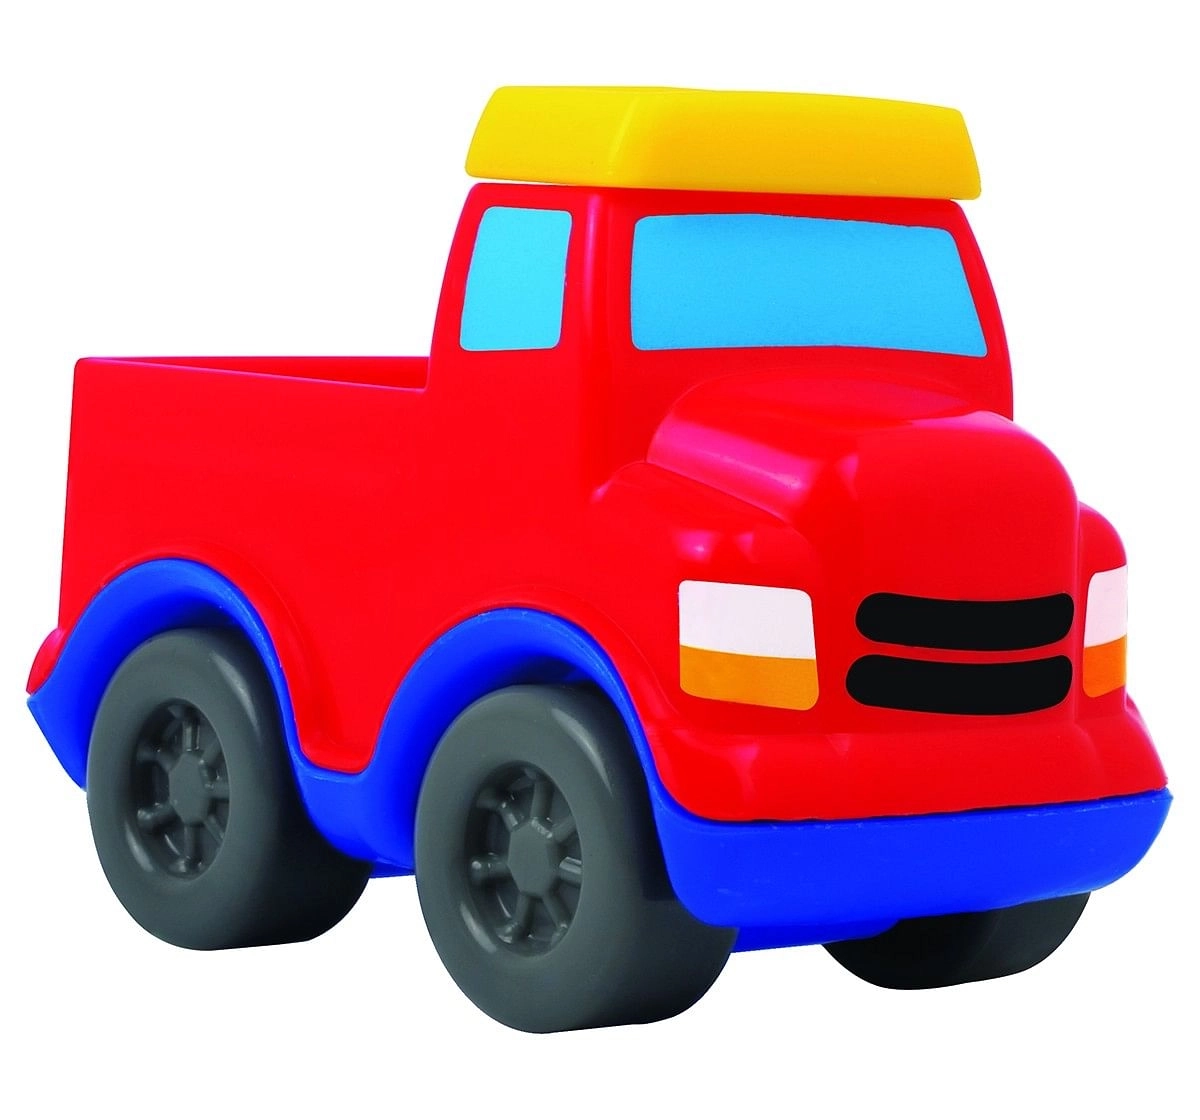  Giggles Mini Vehicles -Truck Early Learner Toys for Kids age 2Y+ 